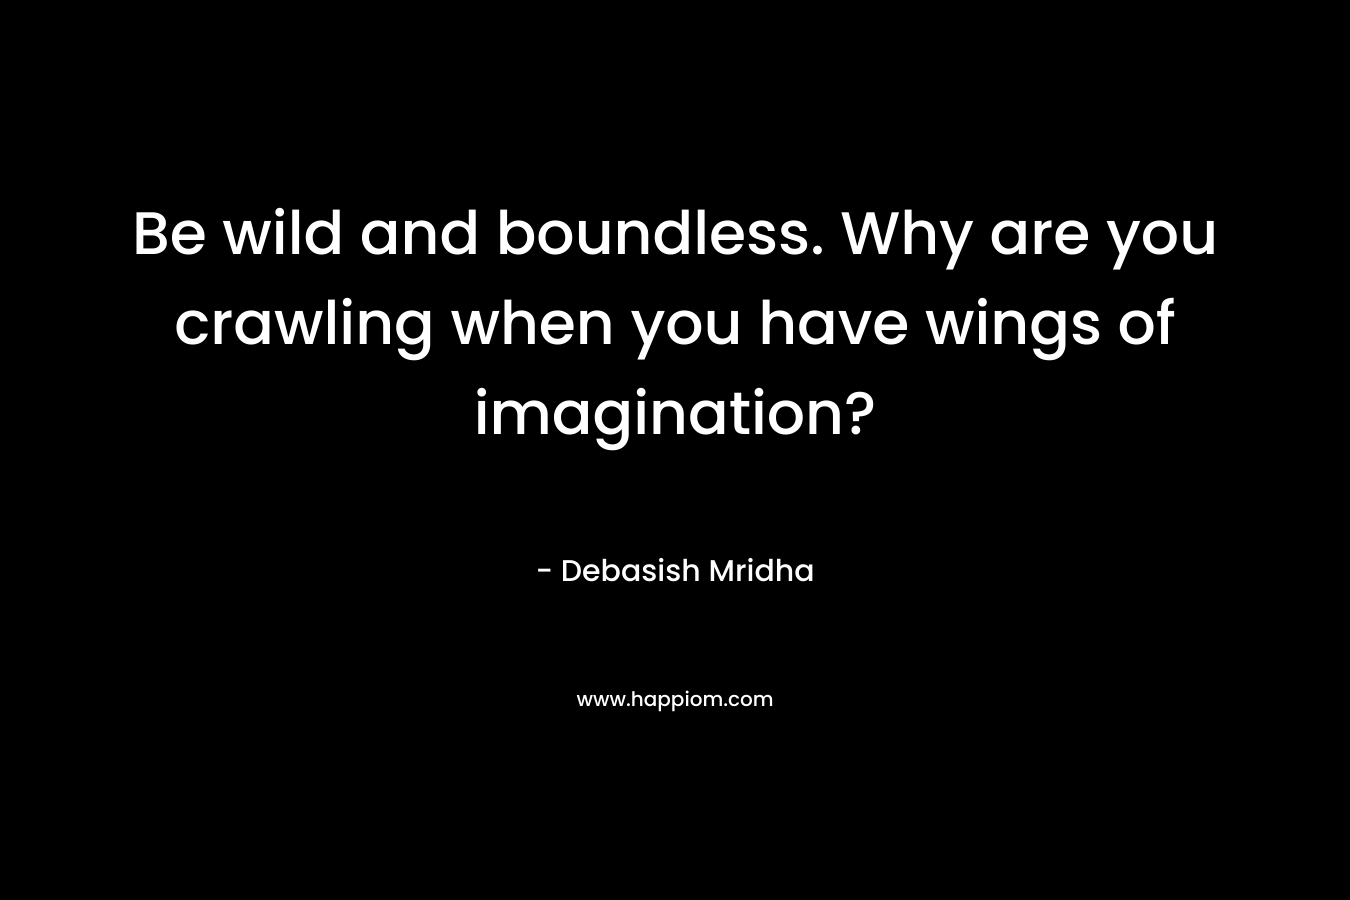 Be wild and boundless. Why are you crawling when you have wings of imagination?